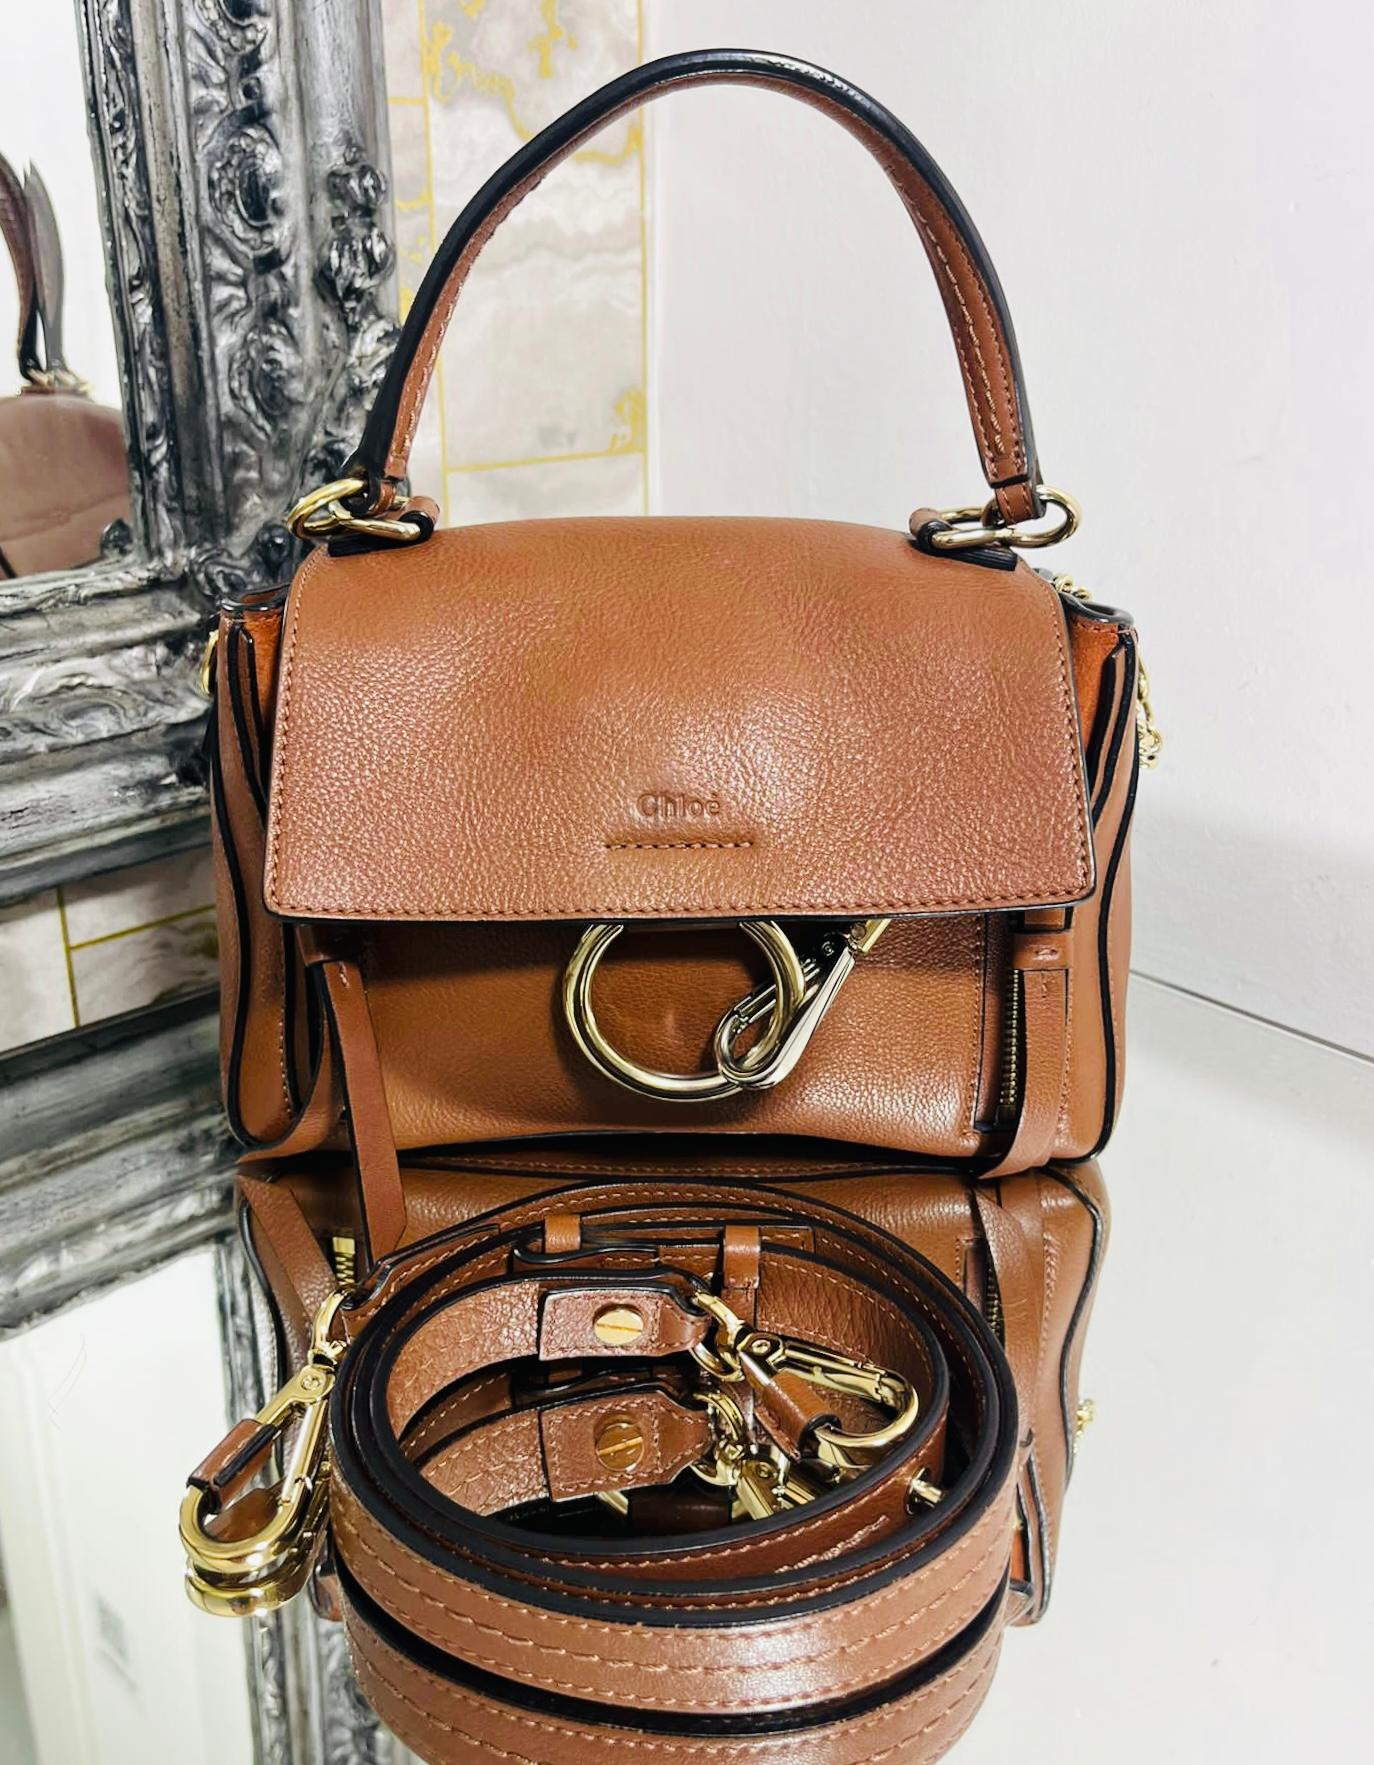 Chloe Mini Faye Day Leather Bag

Tan/brown handbag designed with front magnetic flap and embellished with double zips with leather pullers.

Featuring the line's signature ring loop and hanging chain to one side with gold and silver